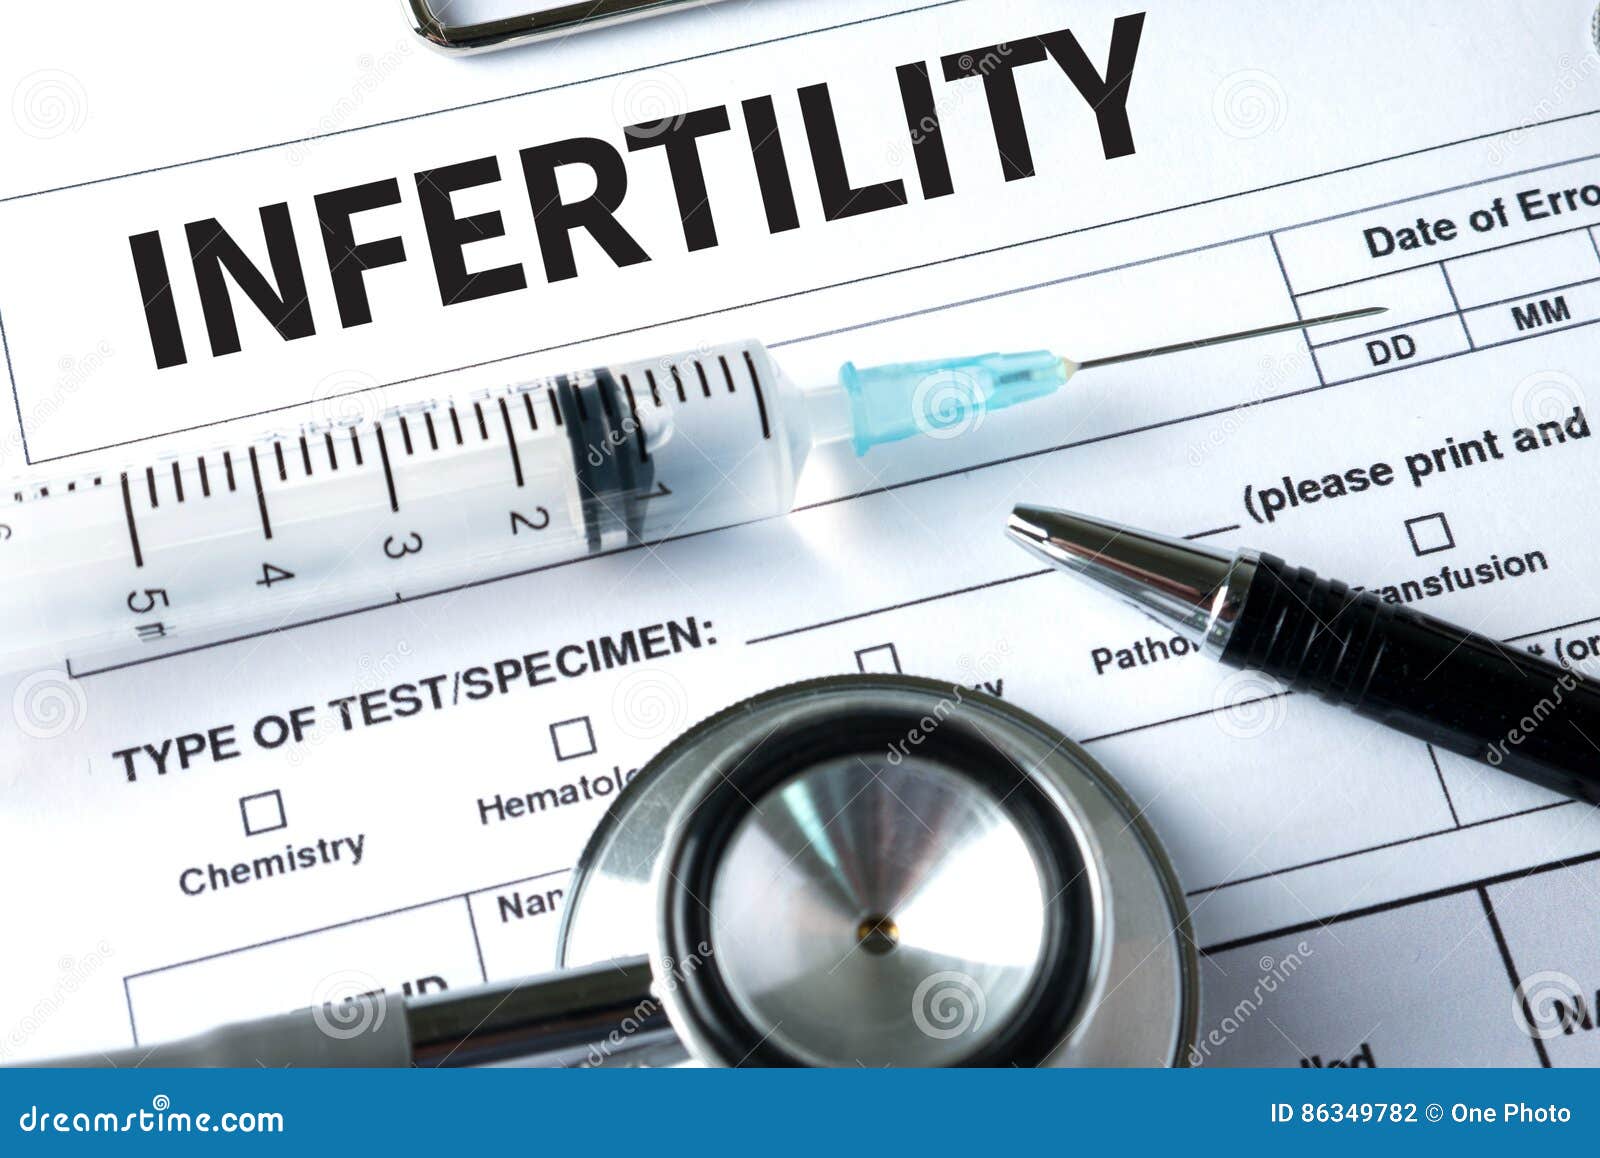 infertility couple giving a bribe for ivf treatment , syringe an